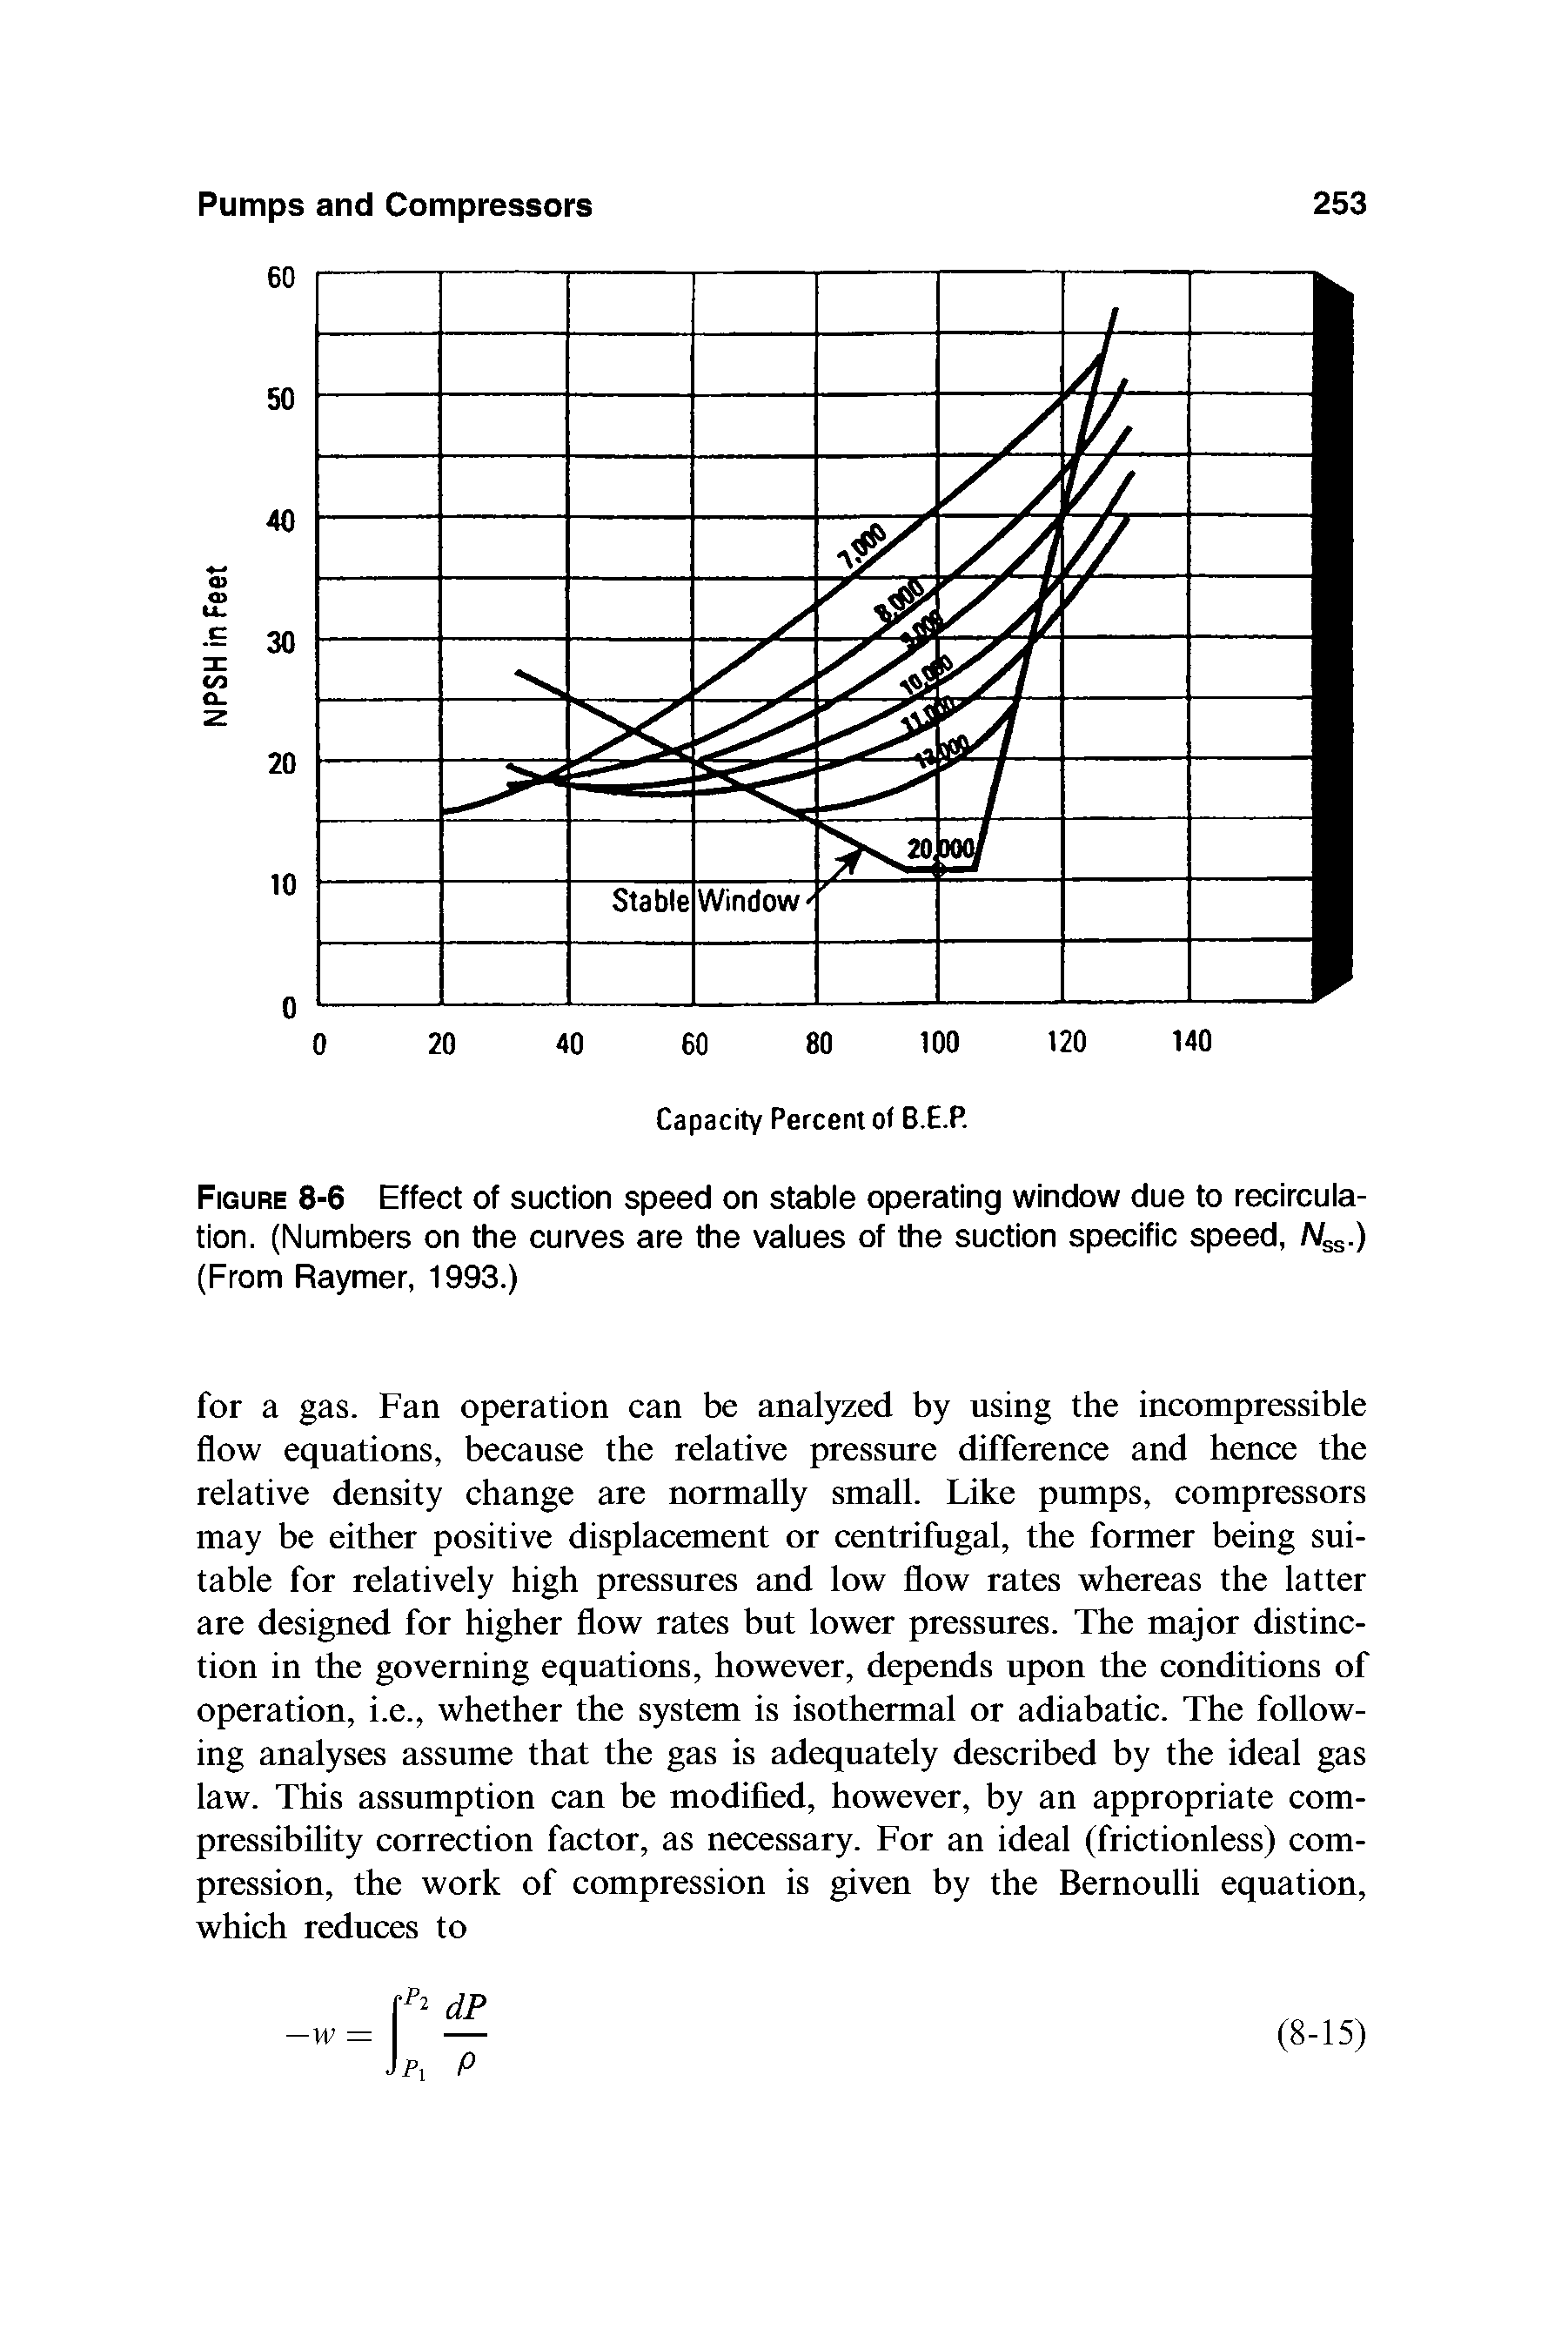 Figure 8-6 Effect of suction speed on stable operating window due to recirculation. (Numbers on the curves are the values of the suction specific speed, Nss.) (From Raymer, 1993.)...